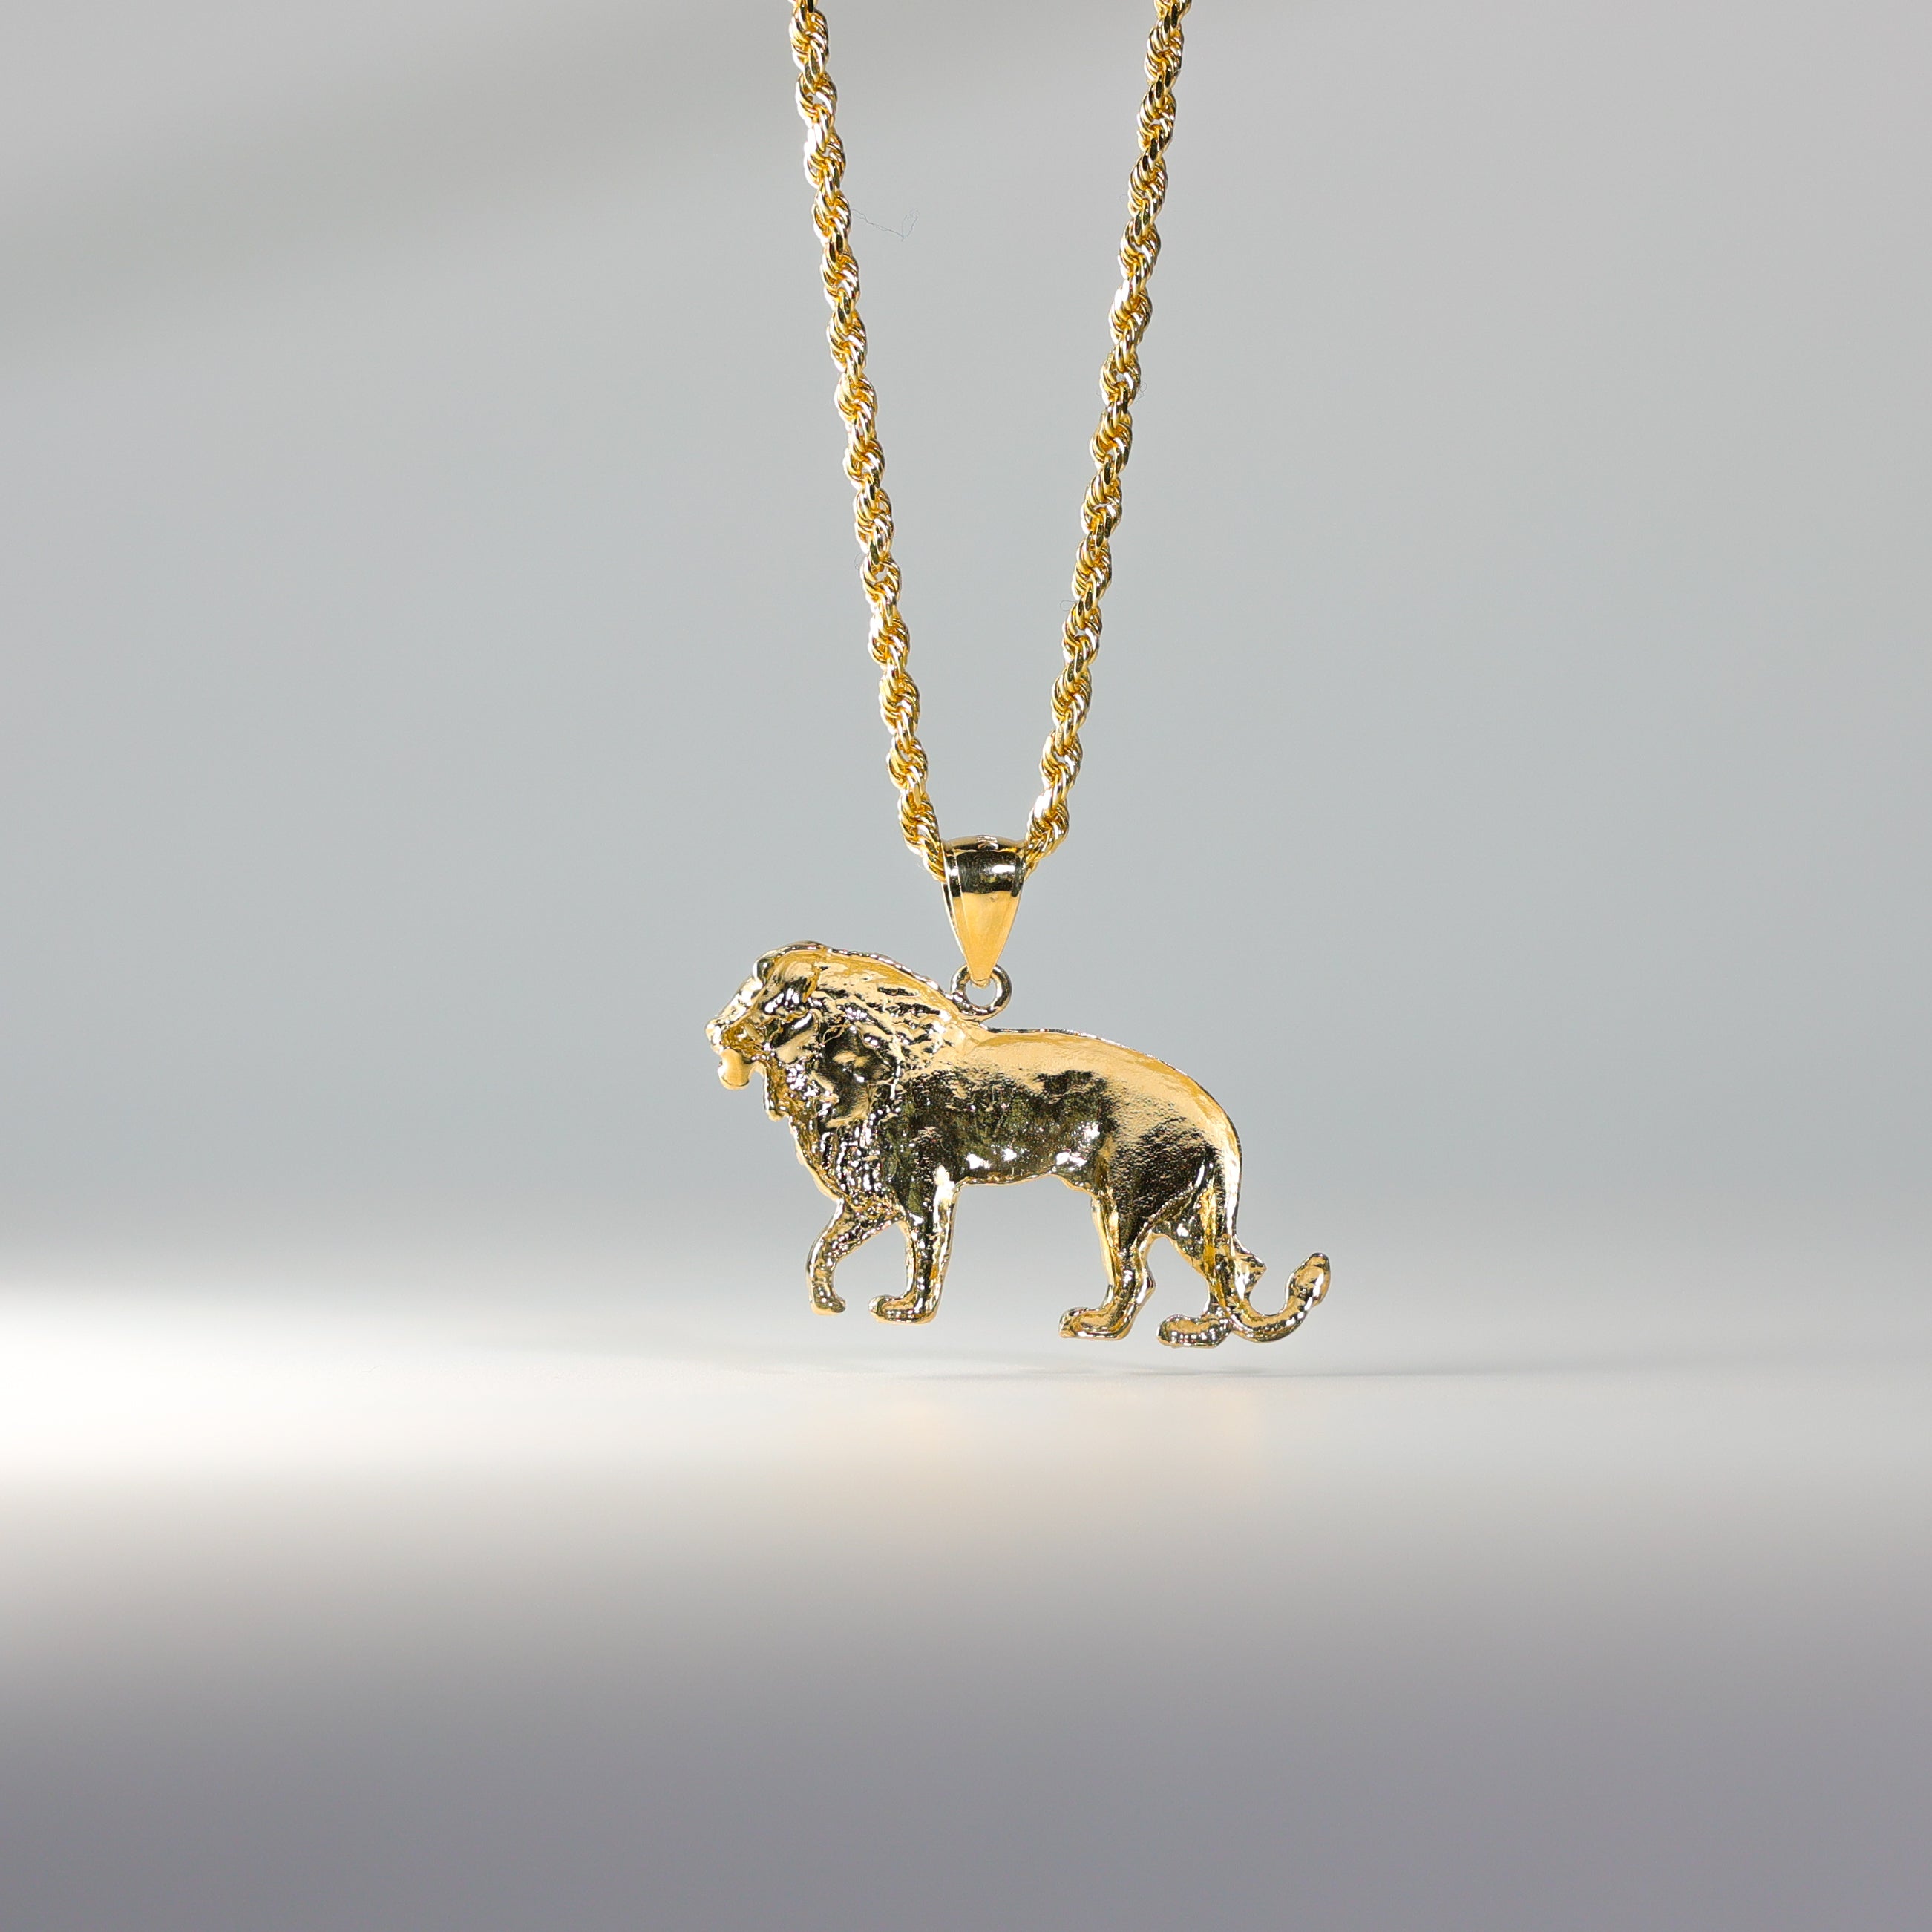 Gold lion Pendant Model-1619 - Charlie & Co. Jewelry